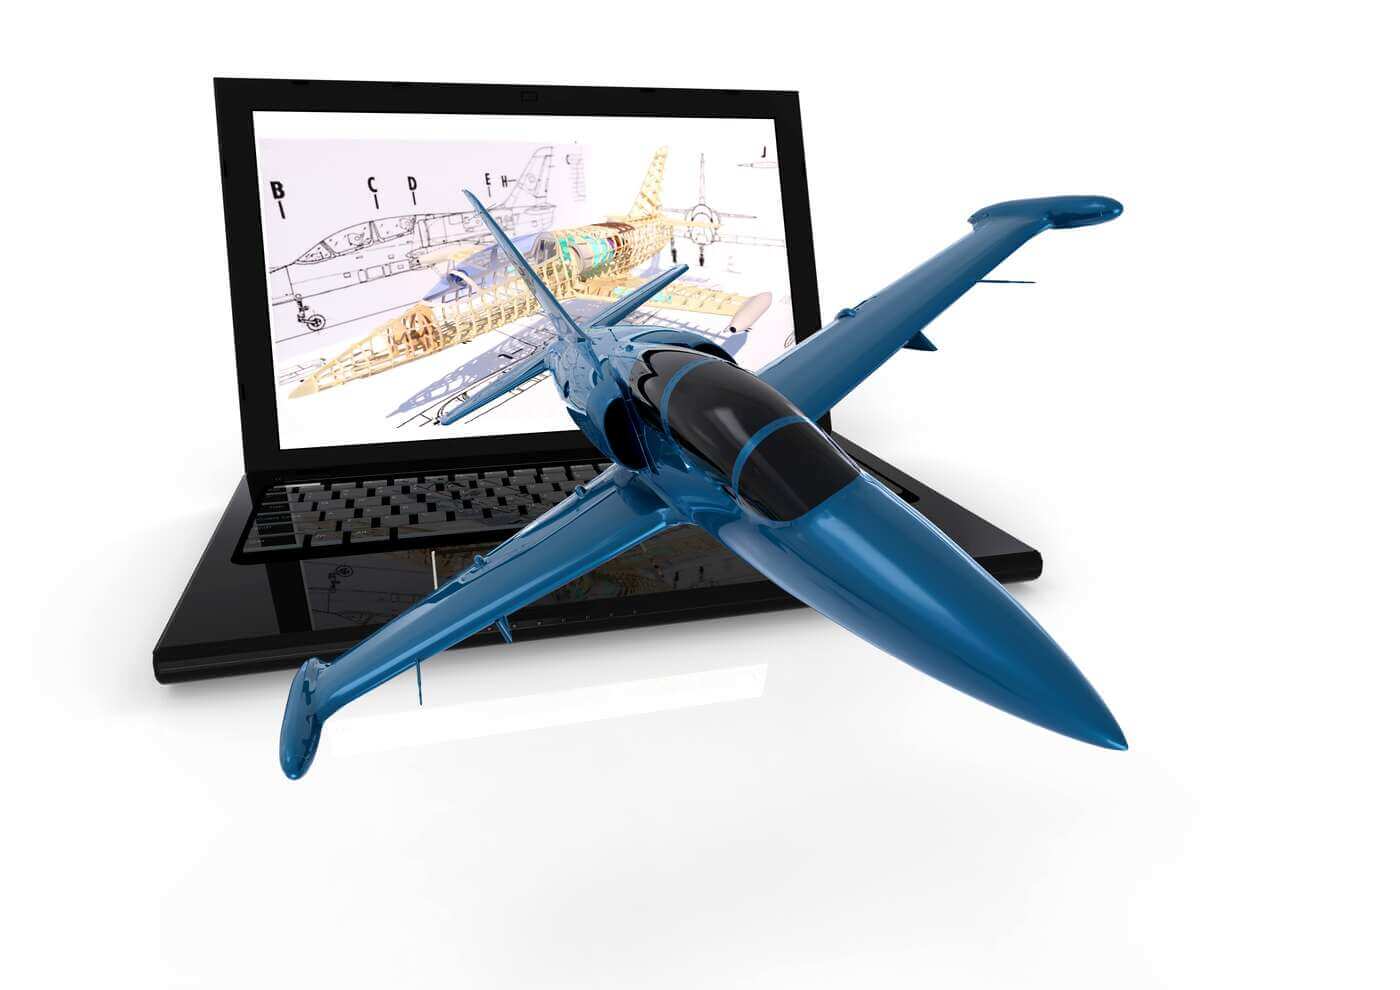 Quality aerospace injection molding services. Aerospace design coming out of laptop